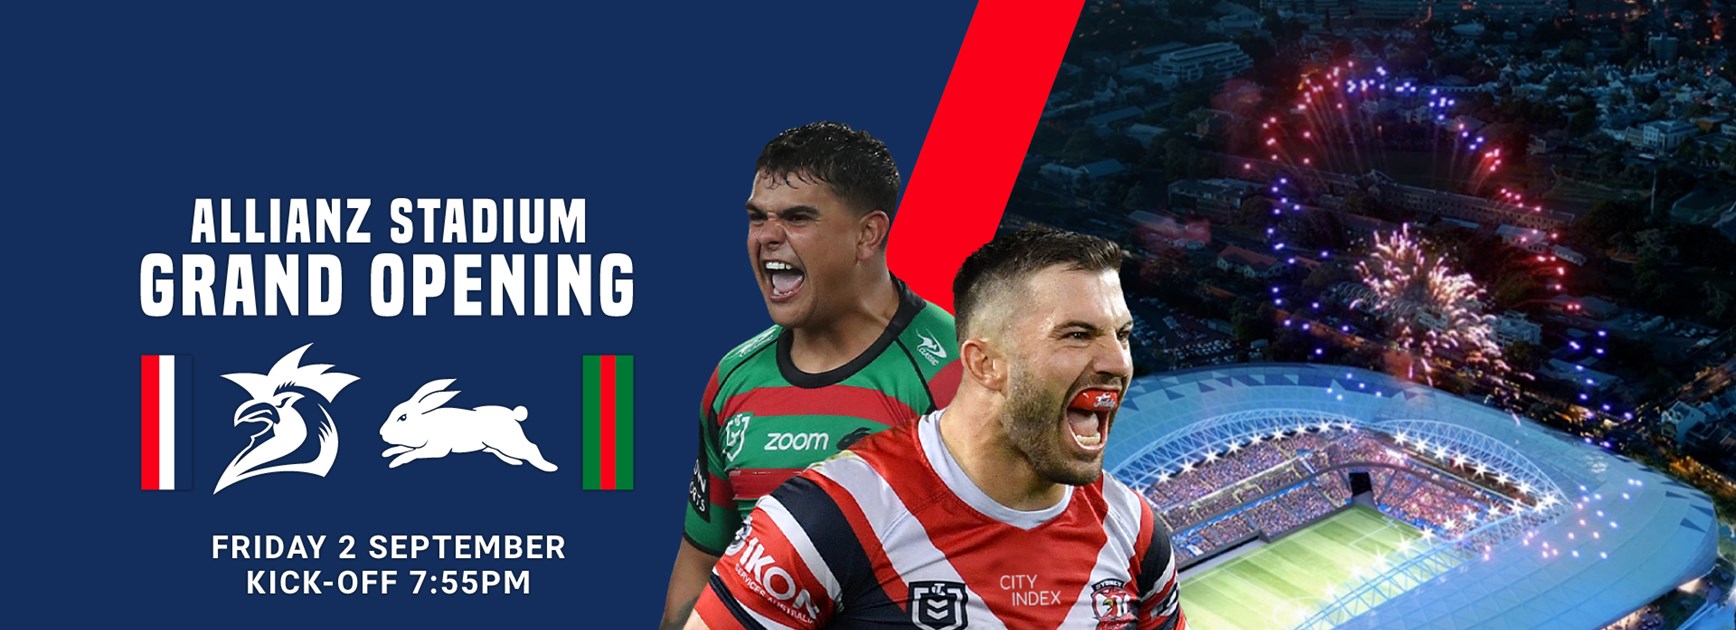 Round 25 Hospitality Packages Available Now!